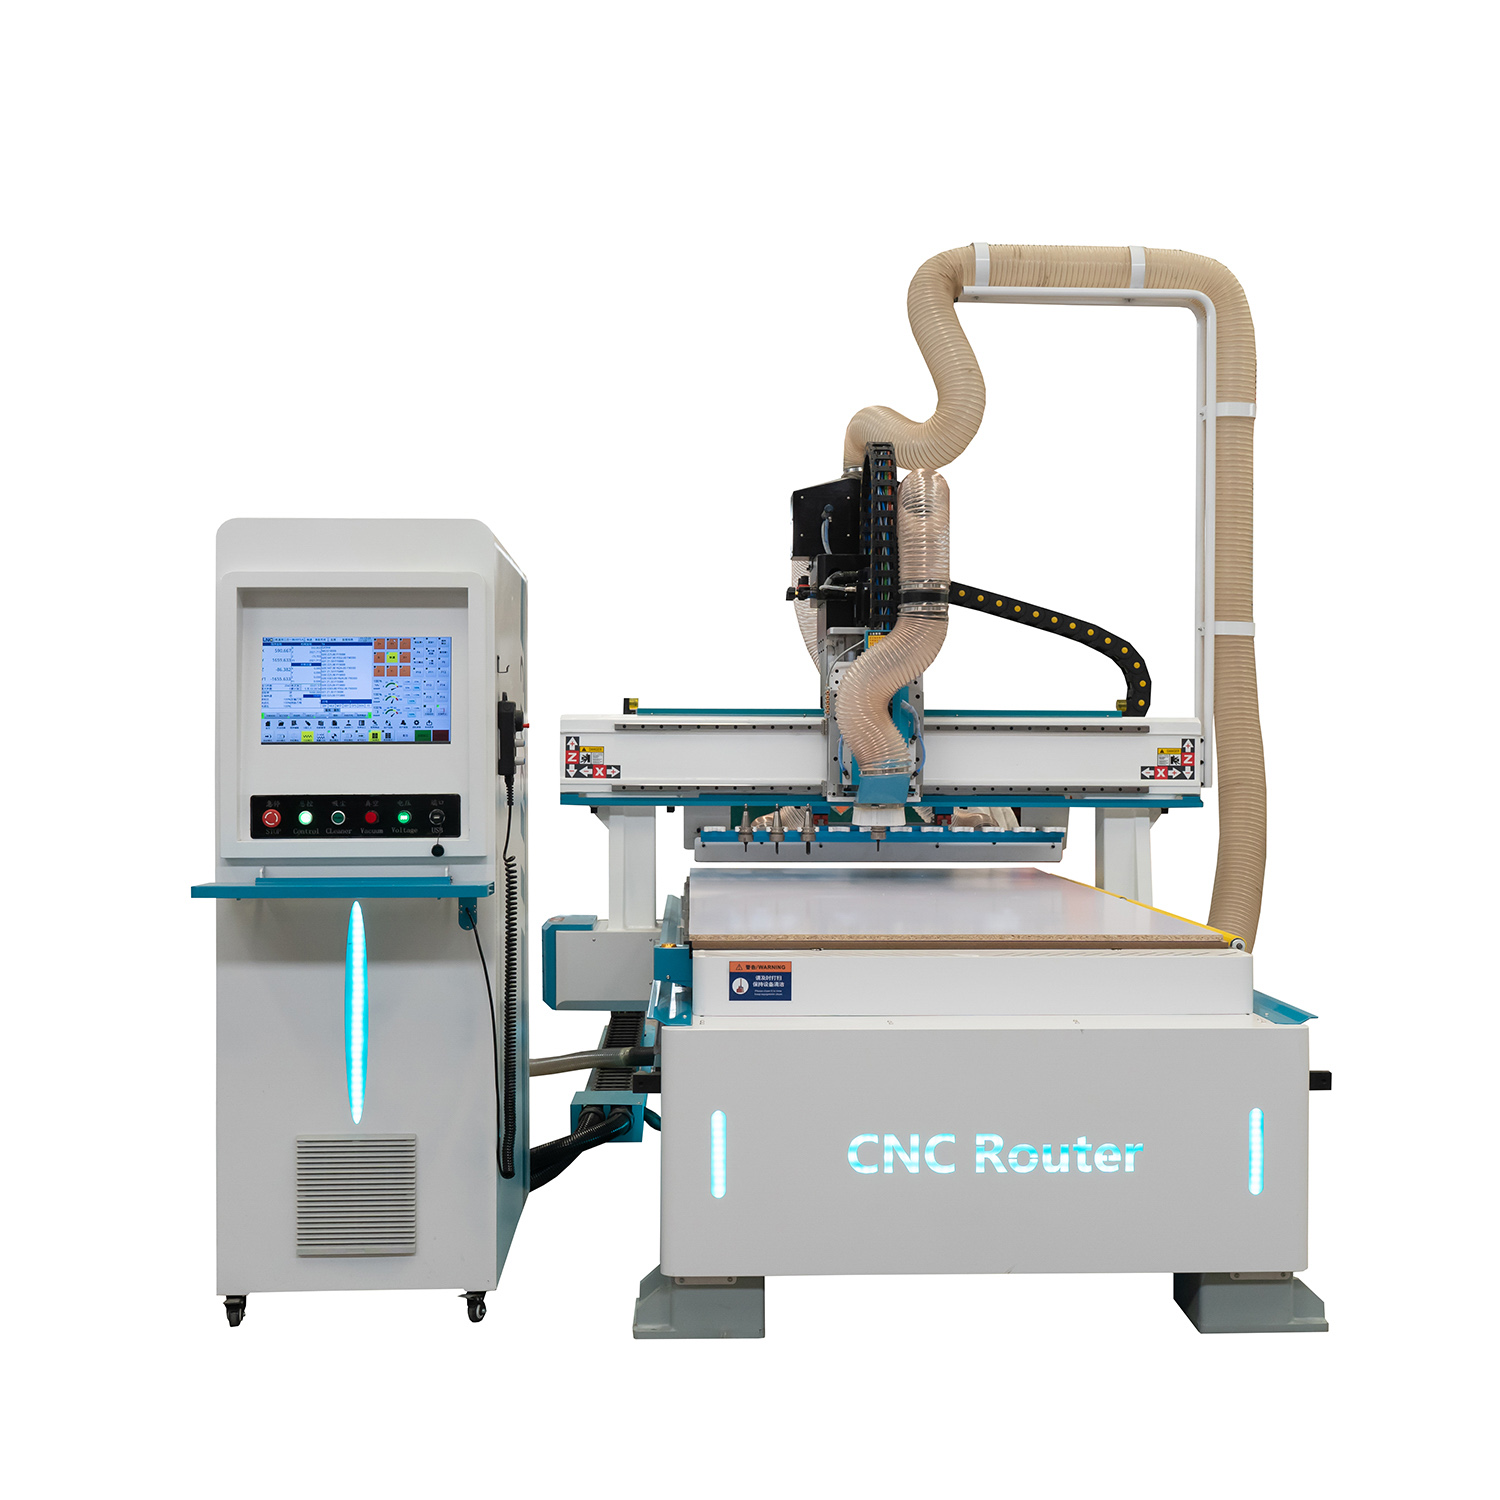 Linear Atc CNC Router for Wood Door Carving Furniture Making Machine with a Saw Cut Featured Image